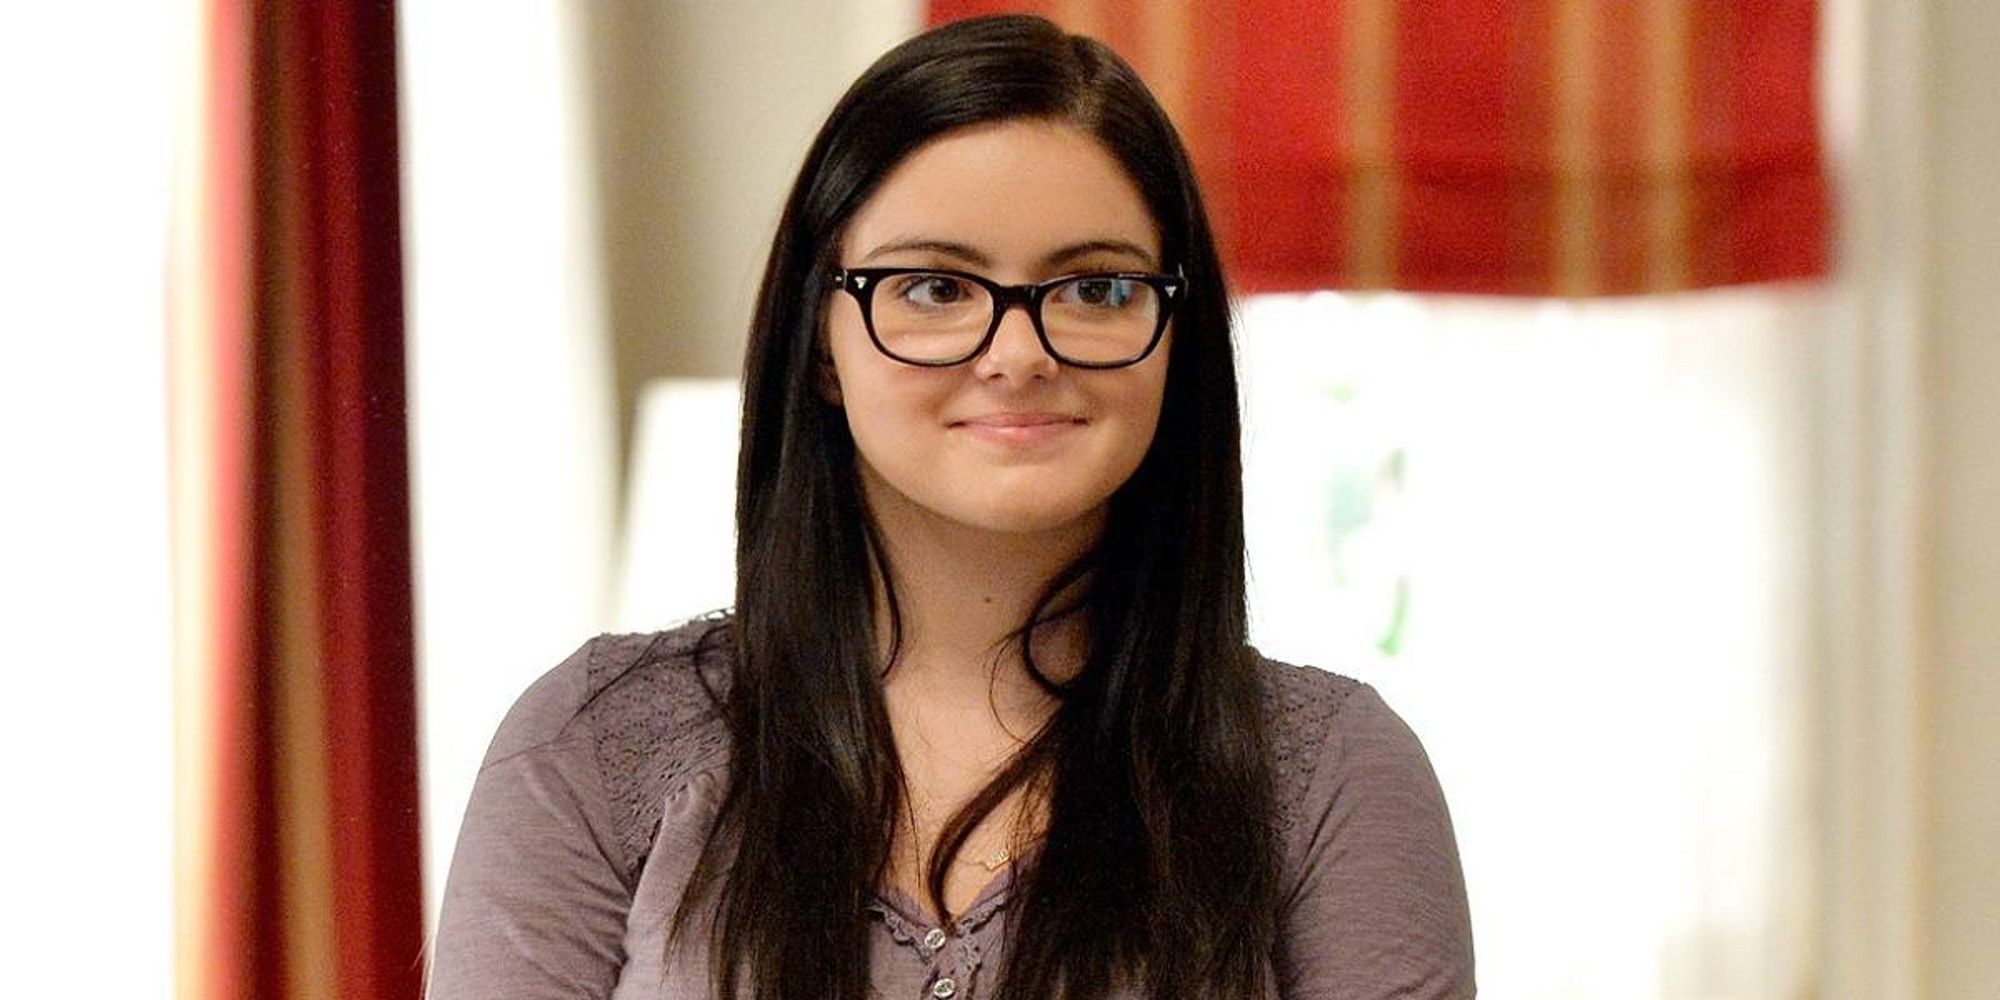 Ariel Winter as Alex Dunphy smiling and looking off-camera in Modern Family.